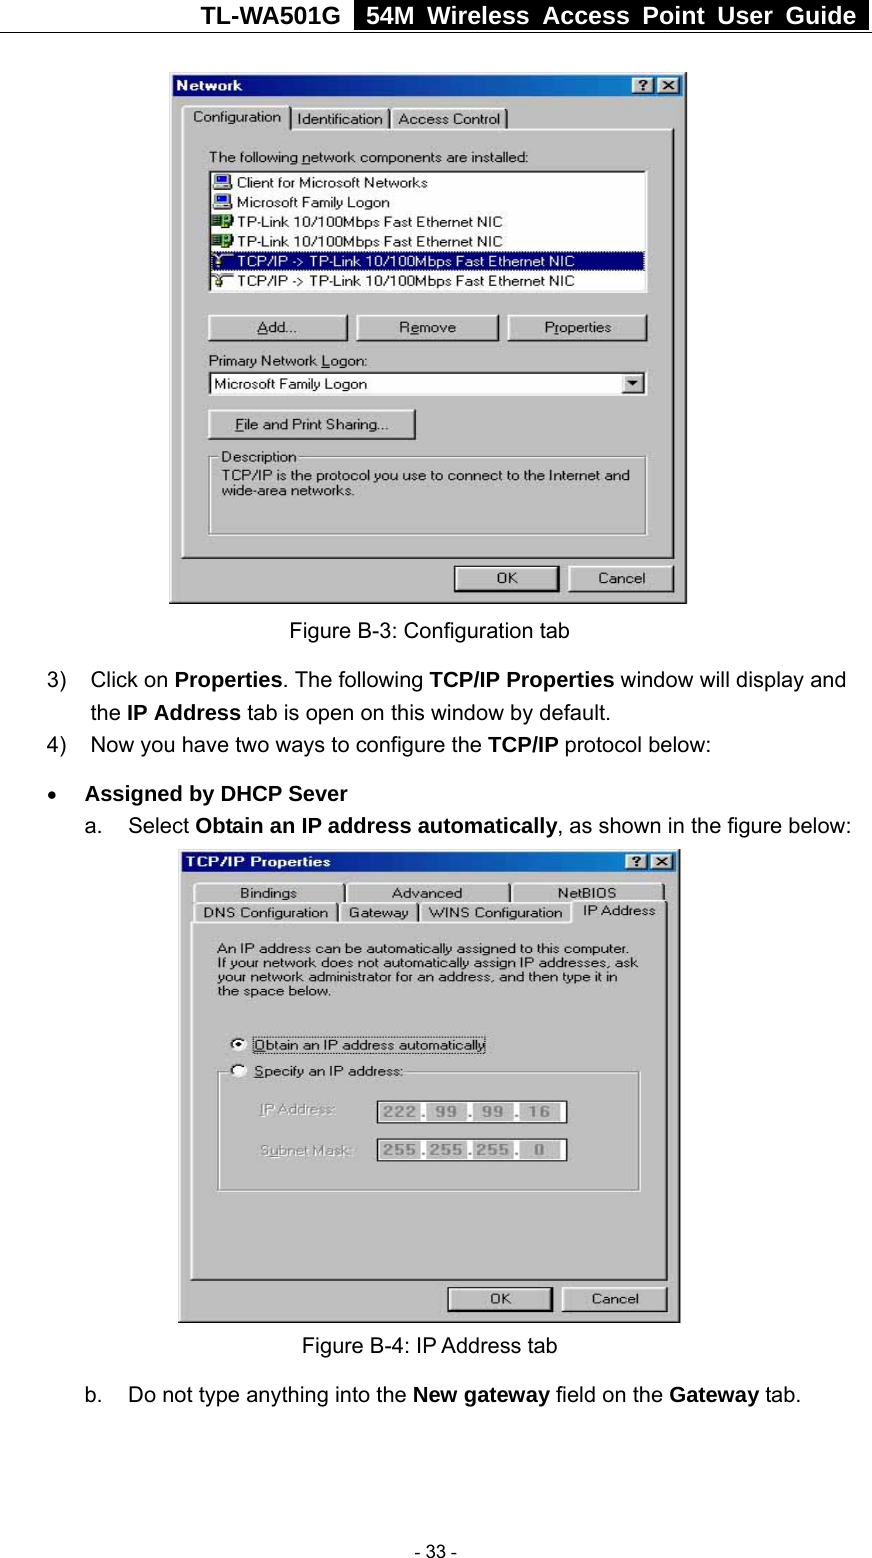 TL-WA501G   54M Wireless Access Point User Guide   Figure B-3: Configuration tab 3) Click on Properties. The following TCP/IP Properties window will display and the IP Address tab is open on this window by default. 4)  Now you have two ways to configure the TCP/IP protocol below: • Assigned by DHCP Sever a. Select Obtain an IP address automatically, as shown in the figure below:  Figure B-4: IP Address tab b.  Do not type anything into the New gateway field on the Gateway tab.    - 33 - 